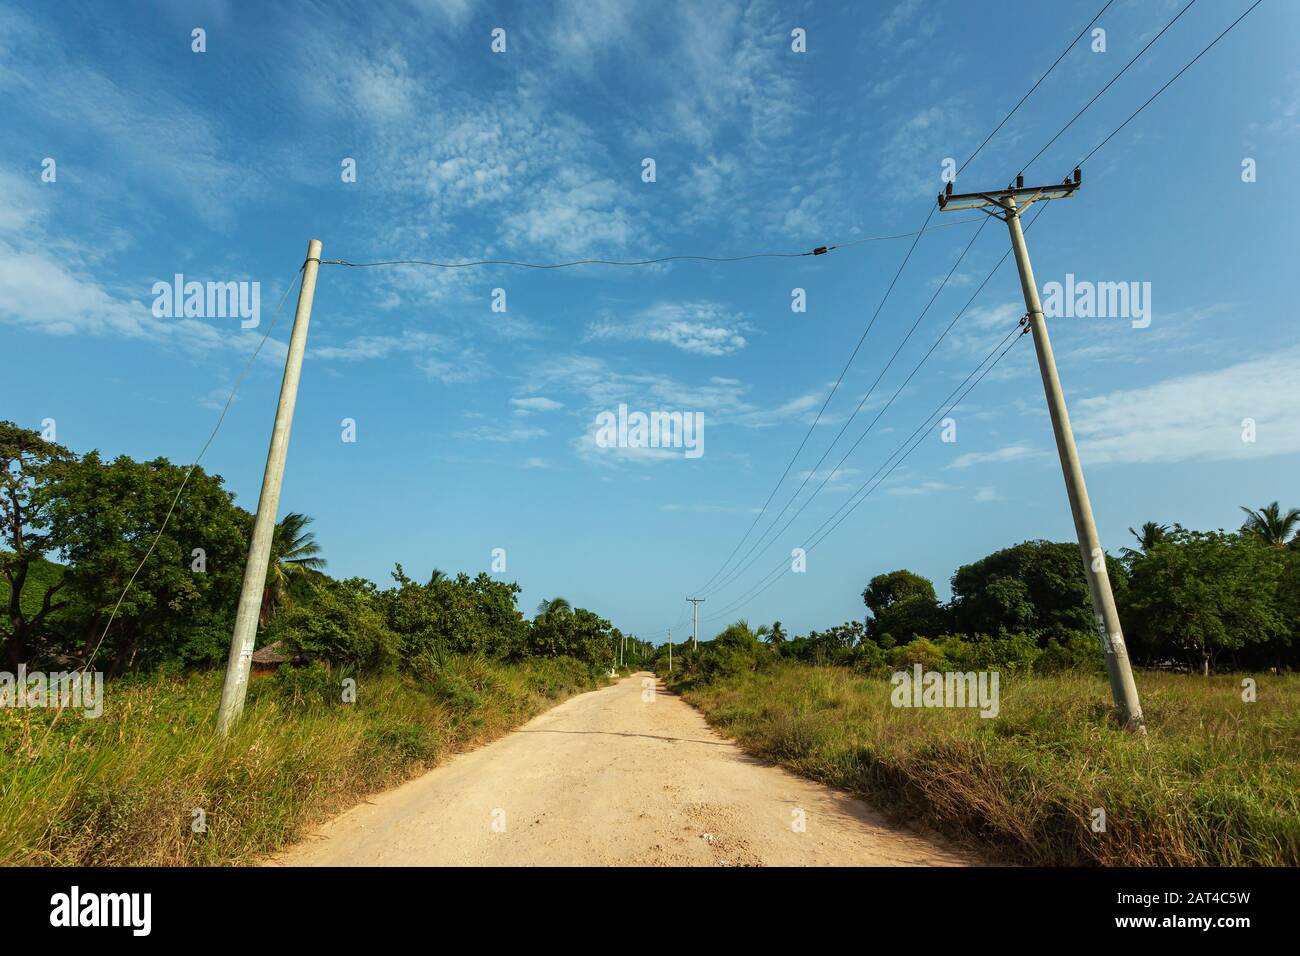 Dry empty road on a bright day in rural Kenya, with electricity poles by the road Stock Photo